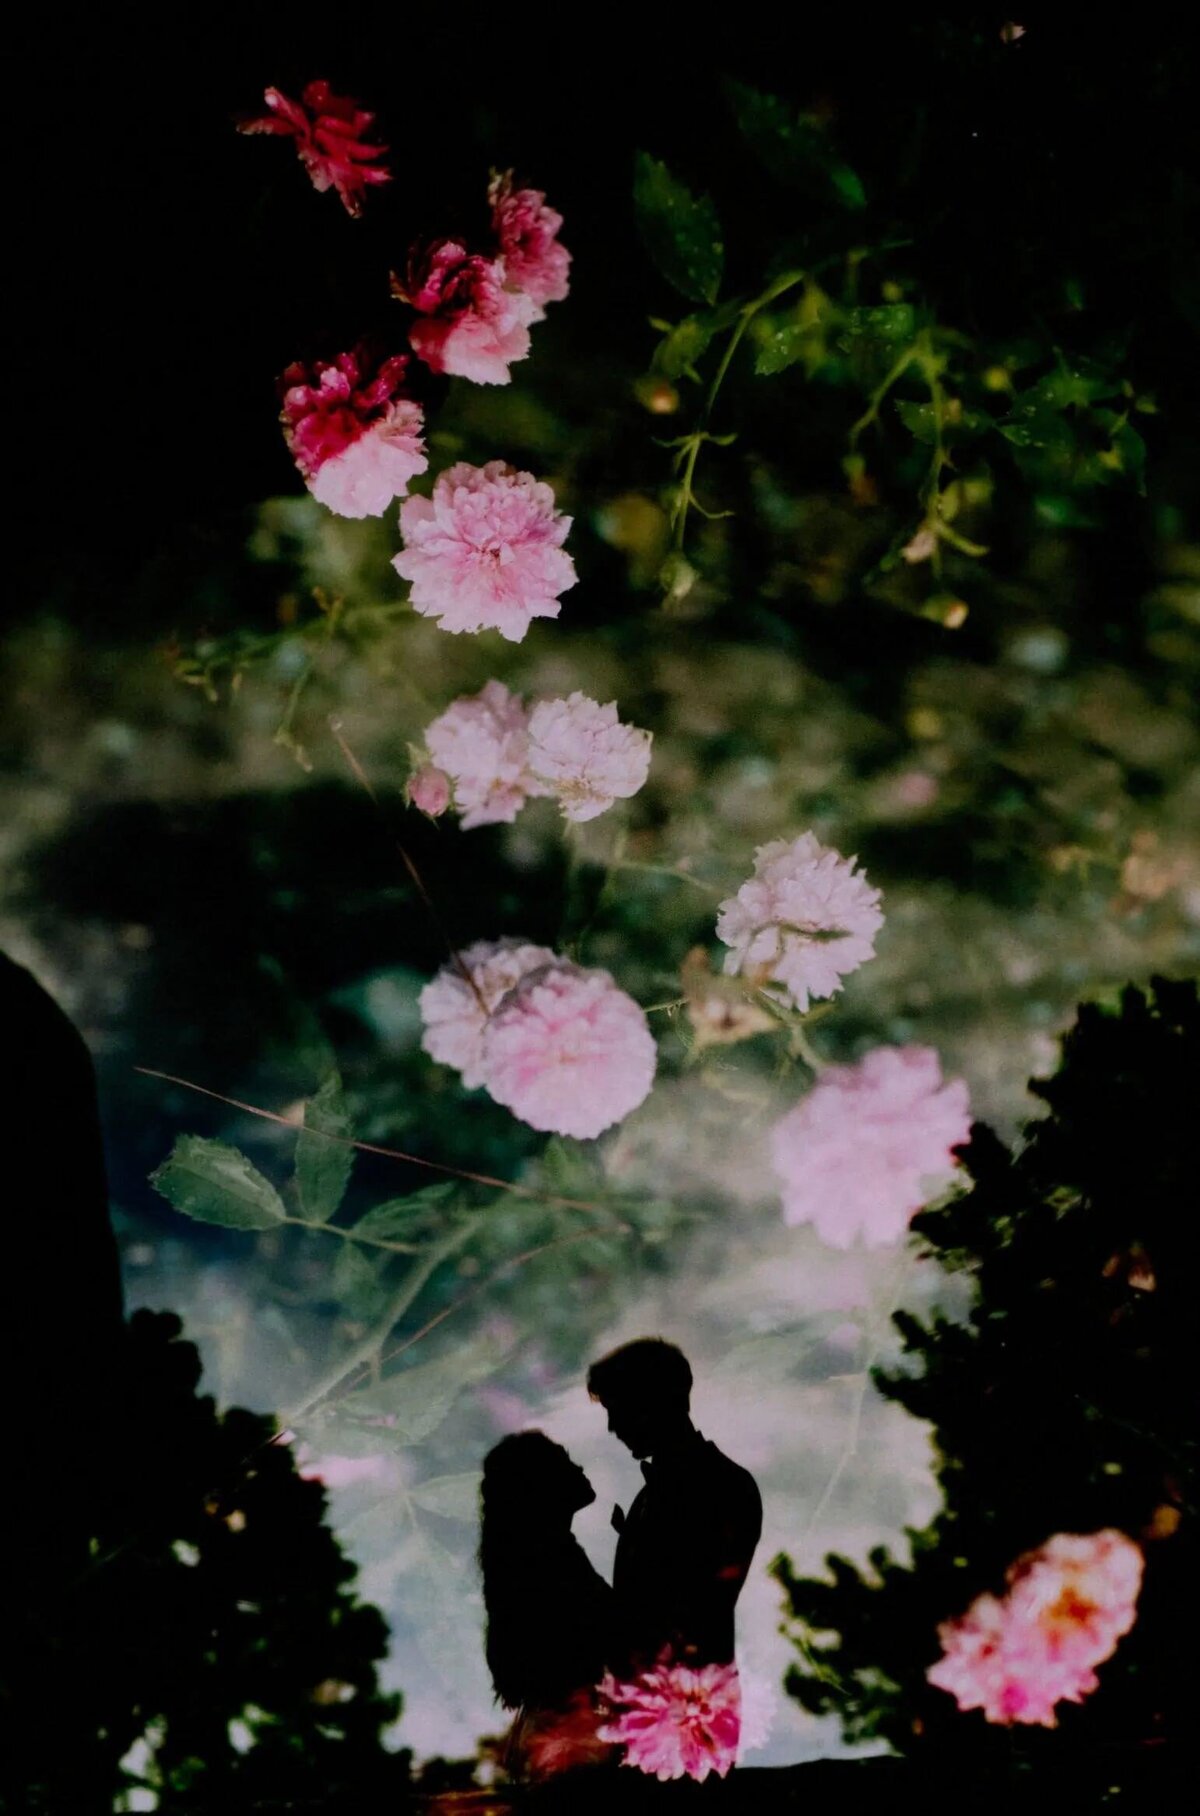 Silhouette of a couple framed by vibrant flowers